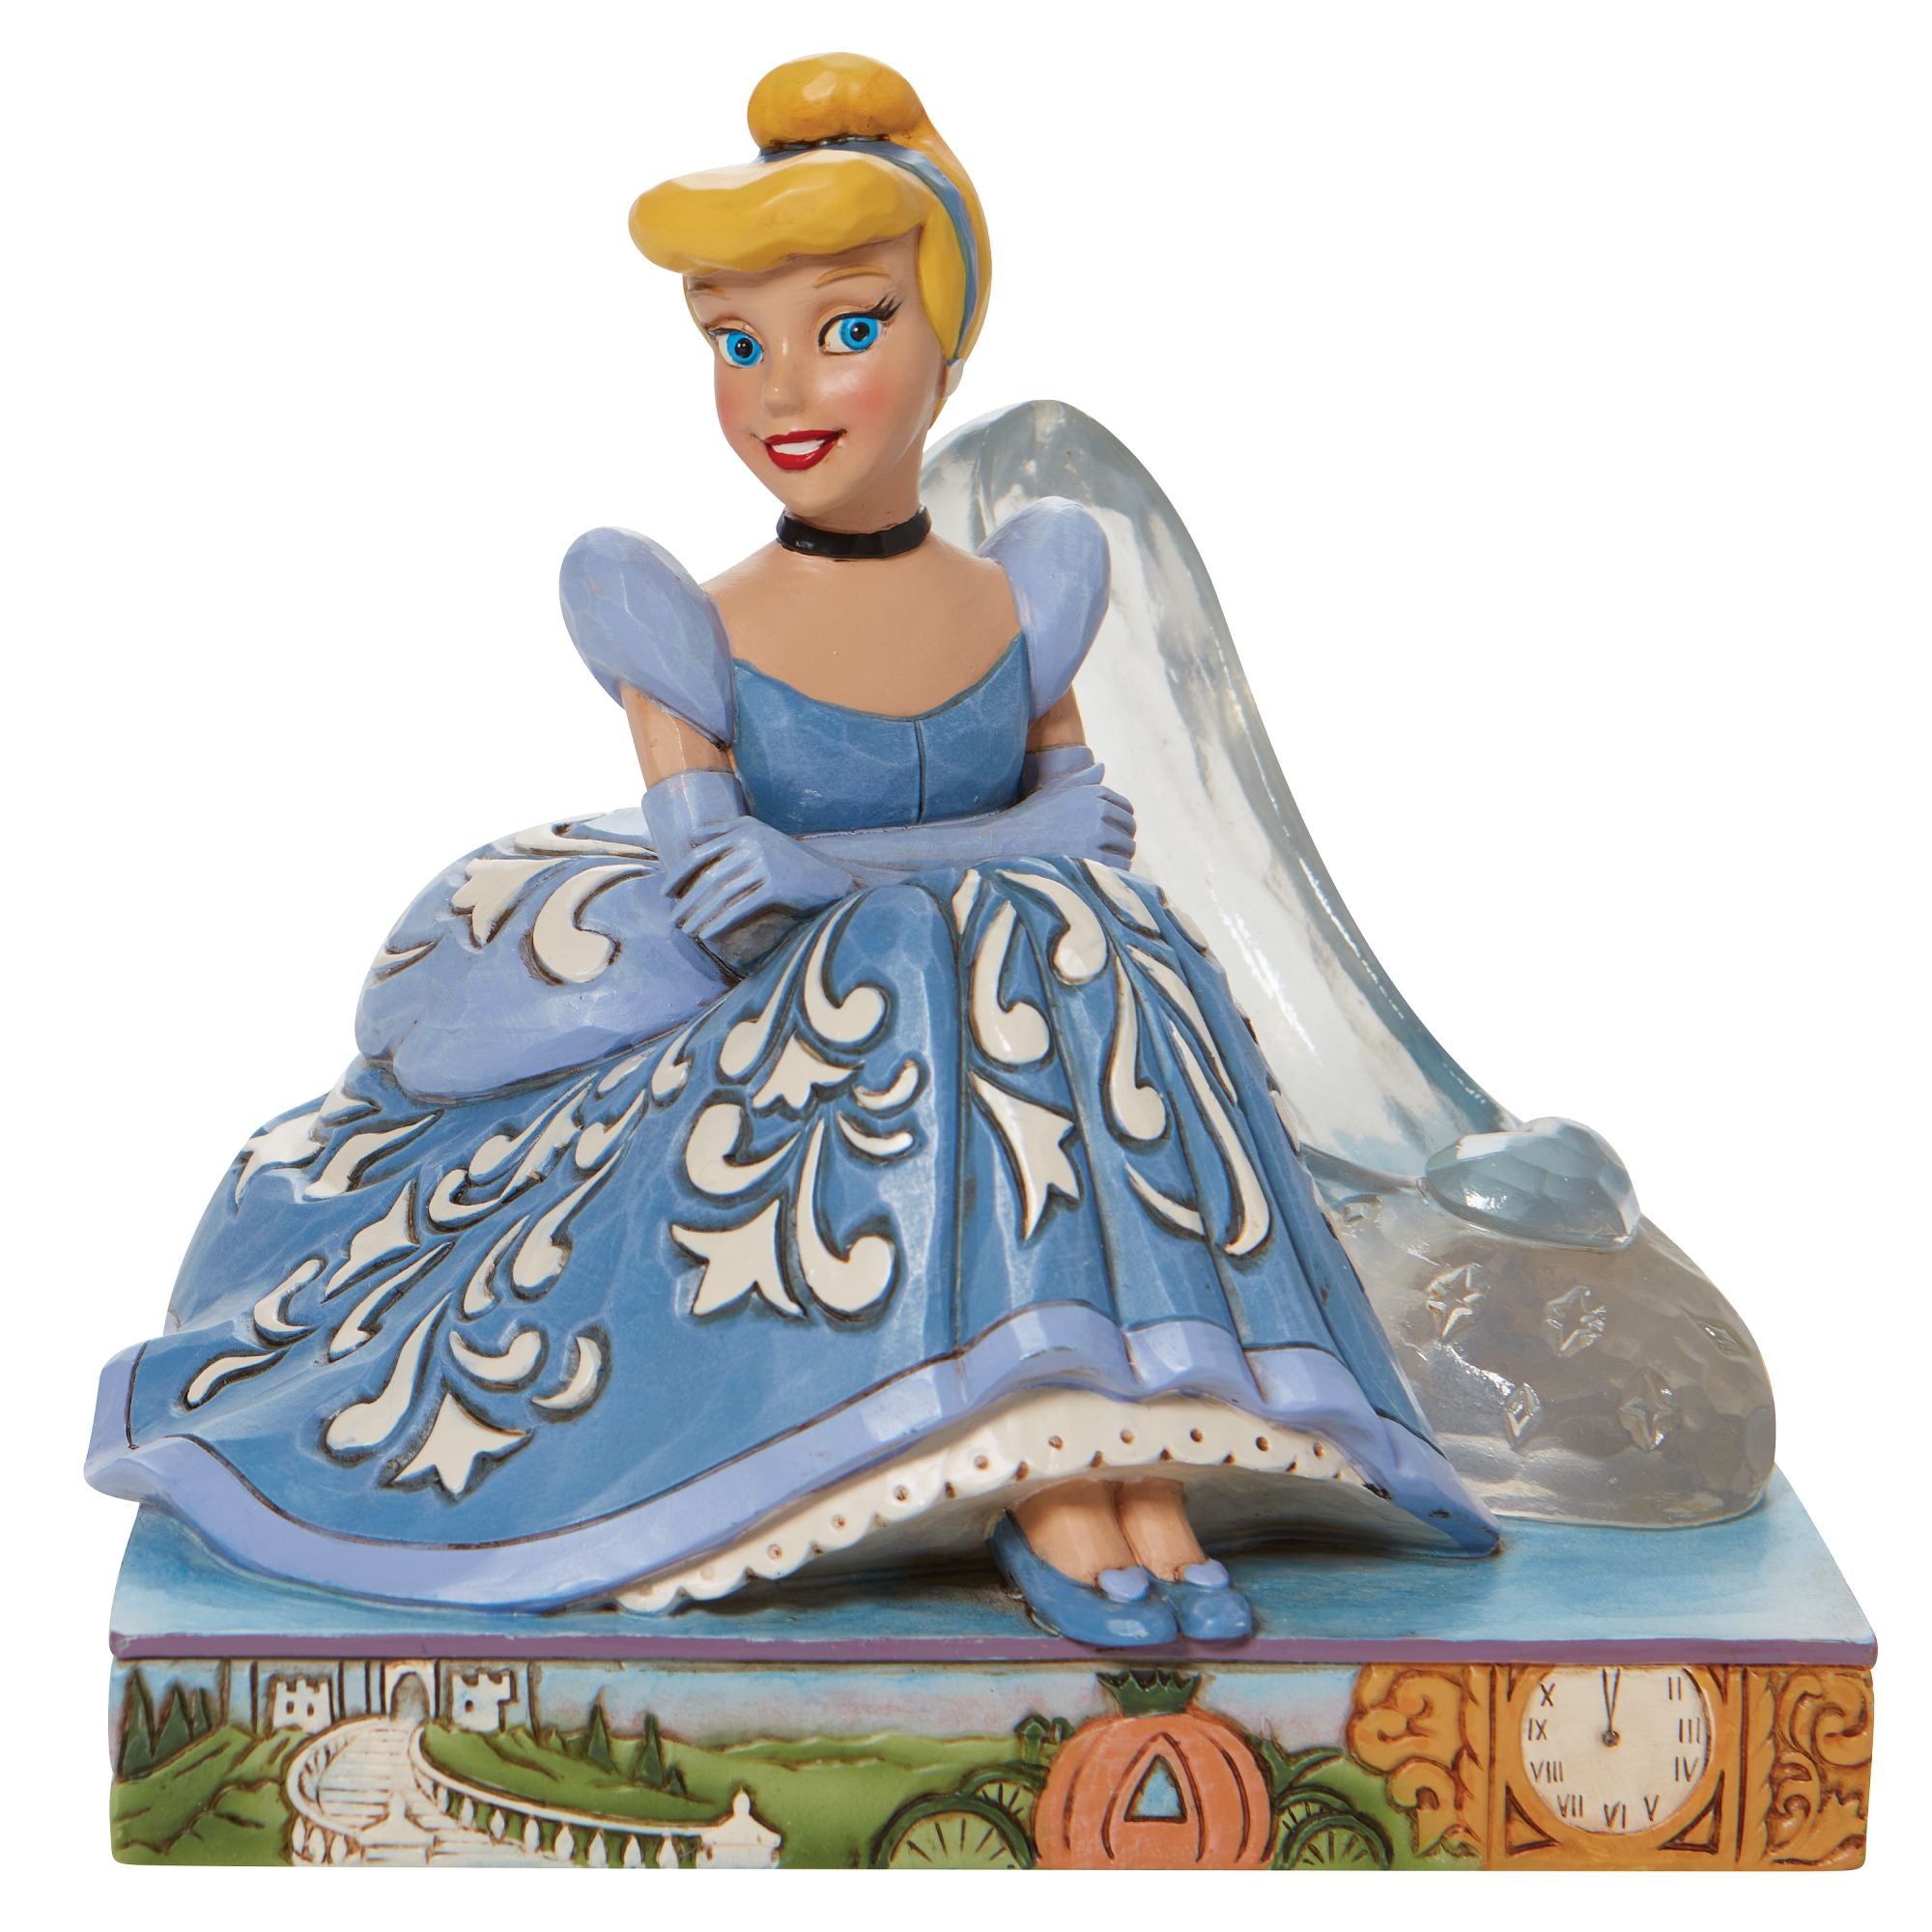 How Much Would Cinderella's Glass Slippers Cost?